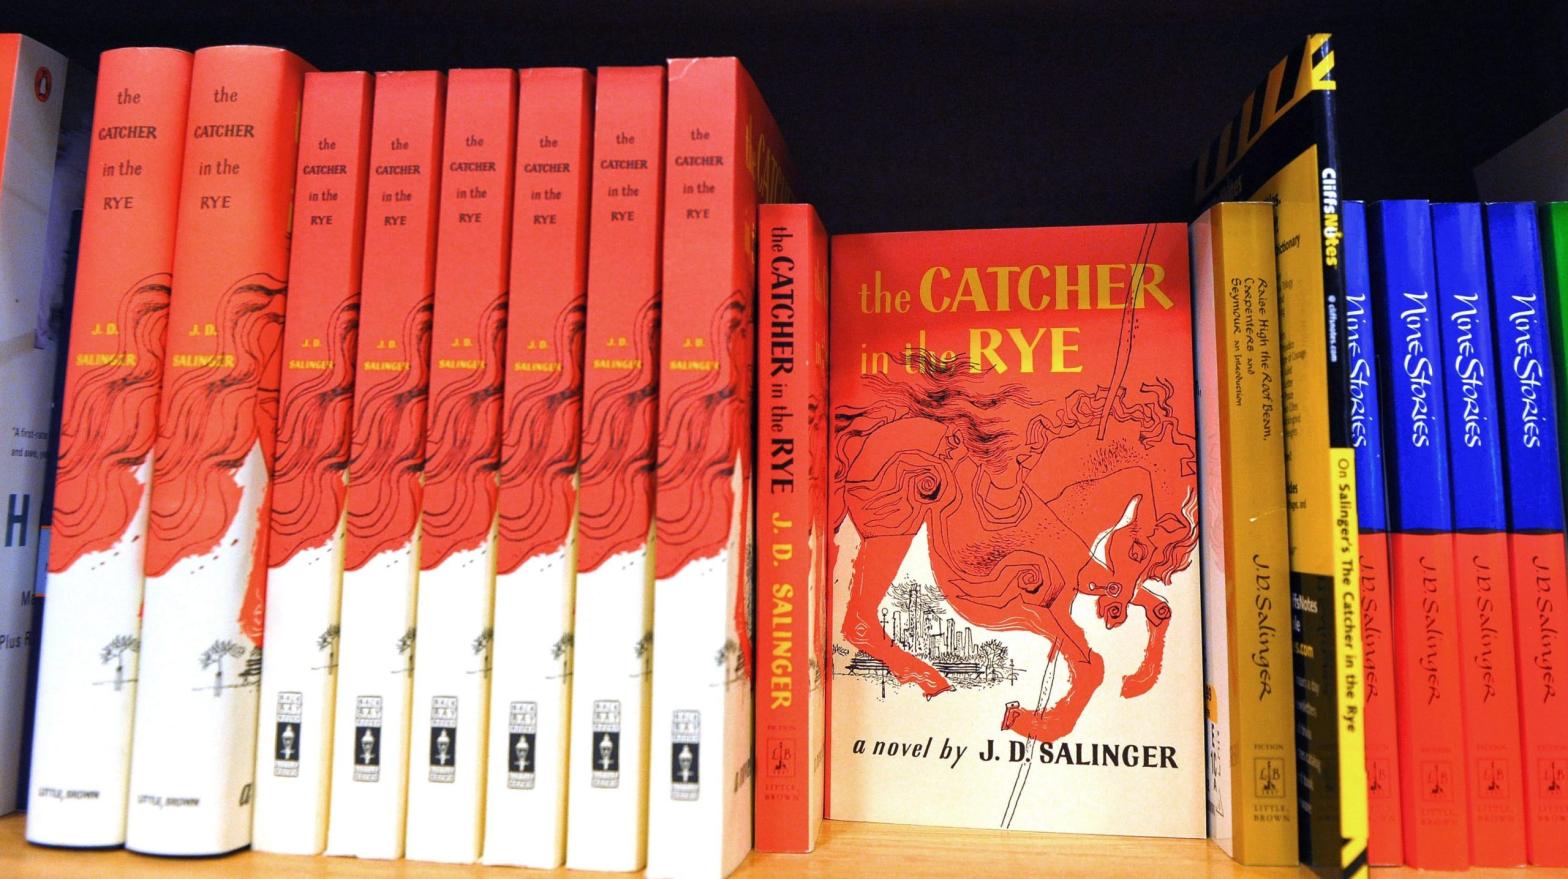 J.D. Salinger's Catcher in the Rye, as seen on a bookstore shelf in Washington, DC in 2010. (Photo: Mandel Ngan, Getty Images)